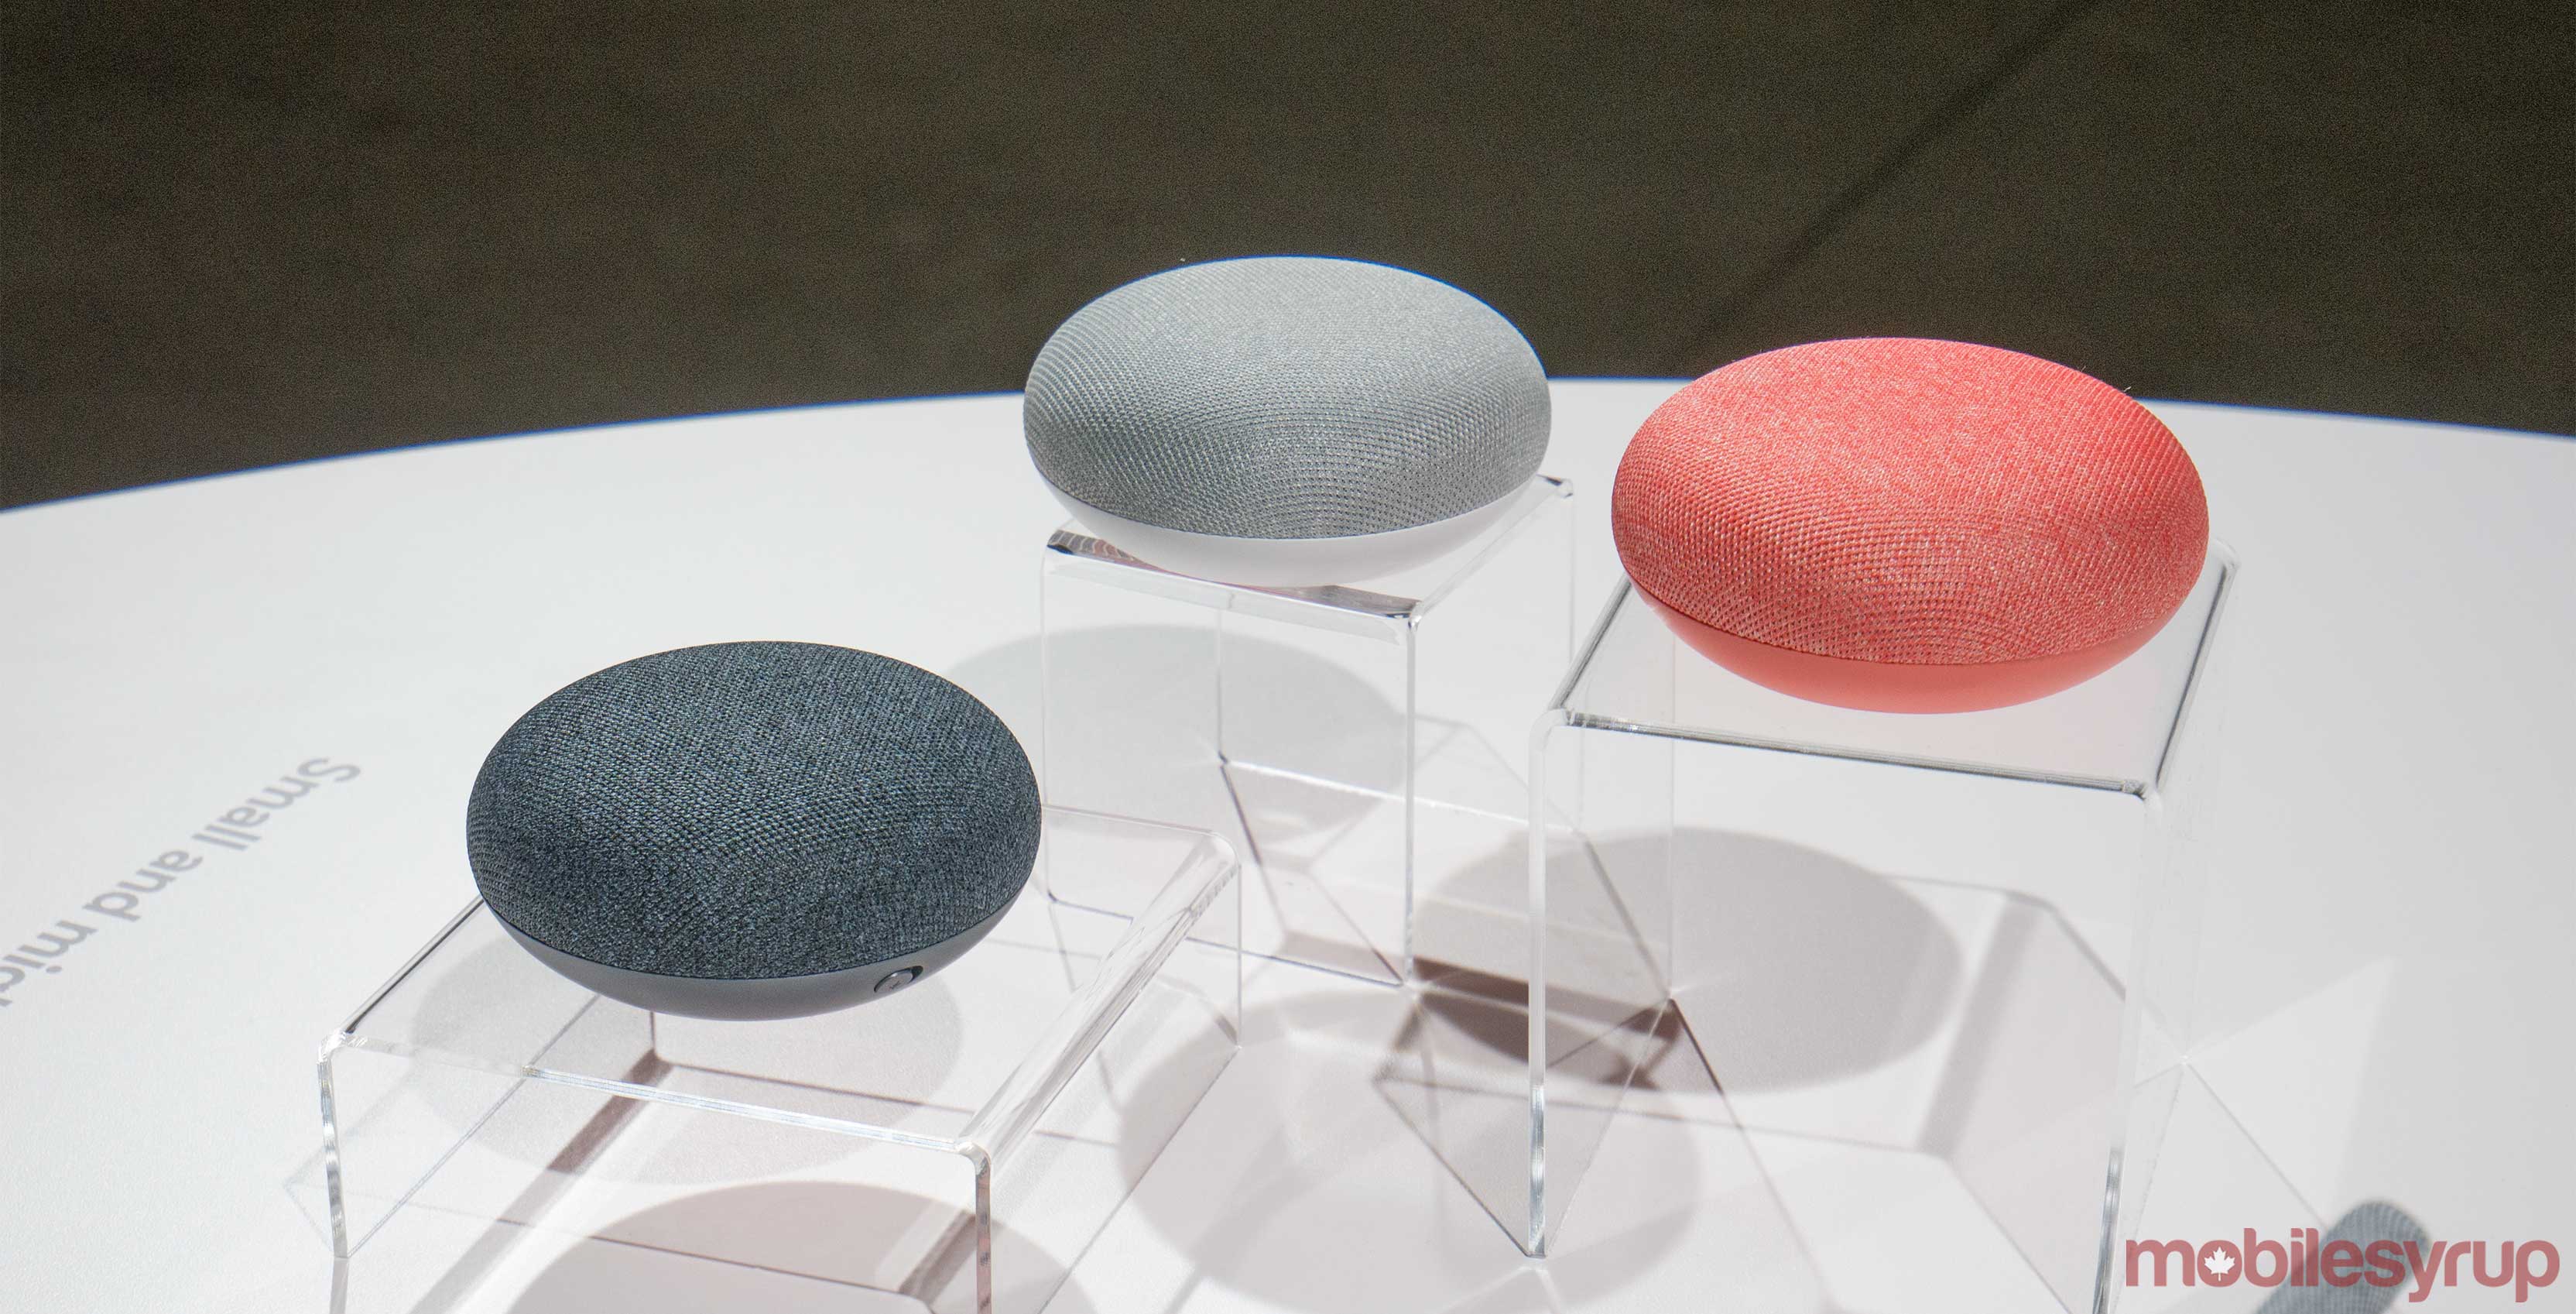 Next Gen Google Home Mini To Add Nest Branding And A 3 5mm Audio Jack